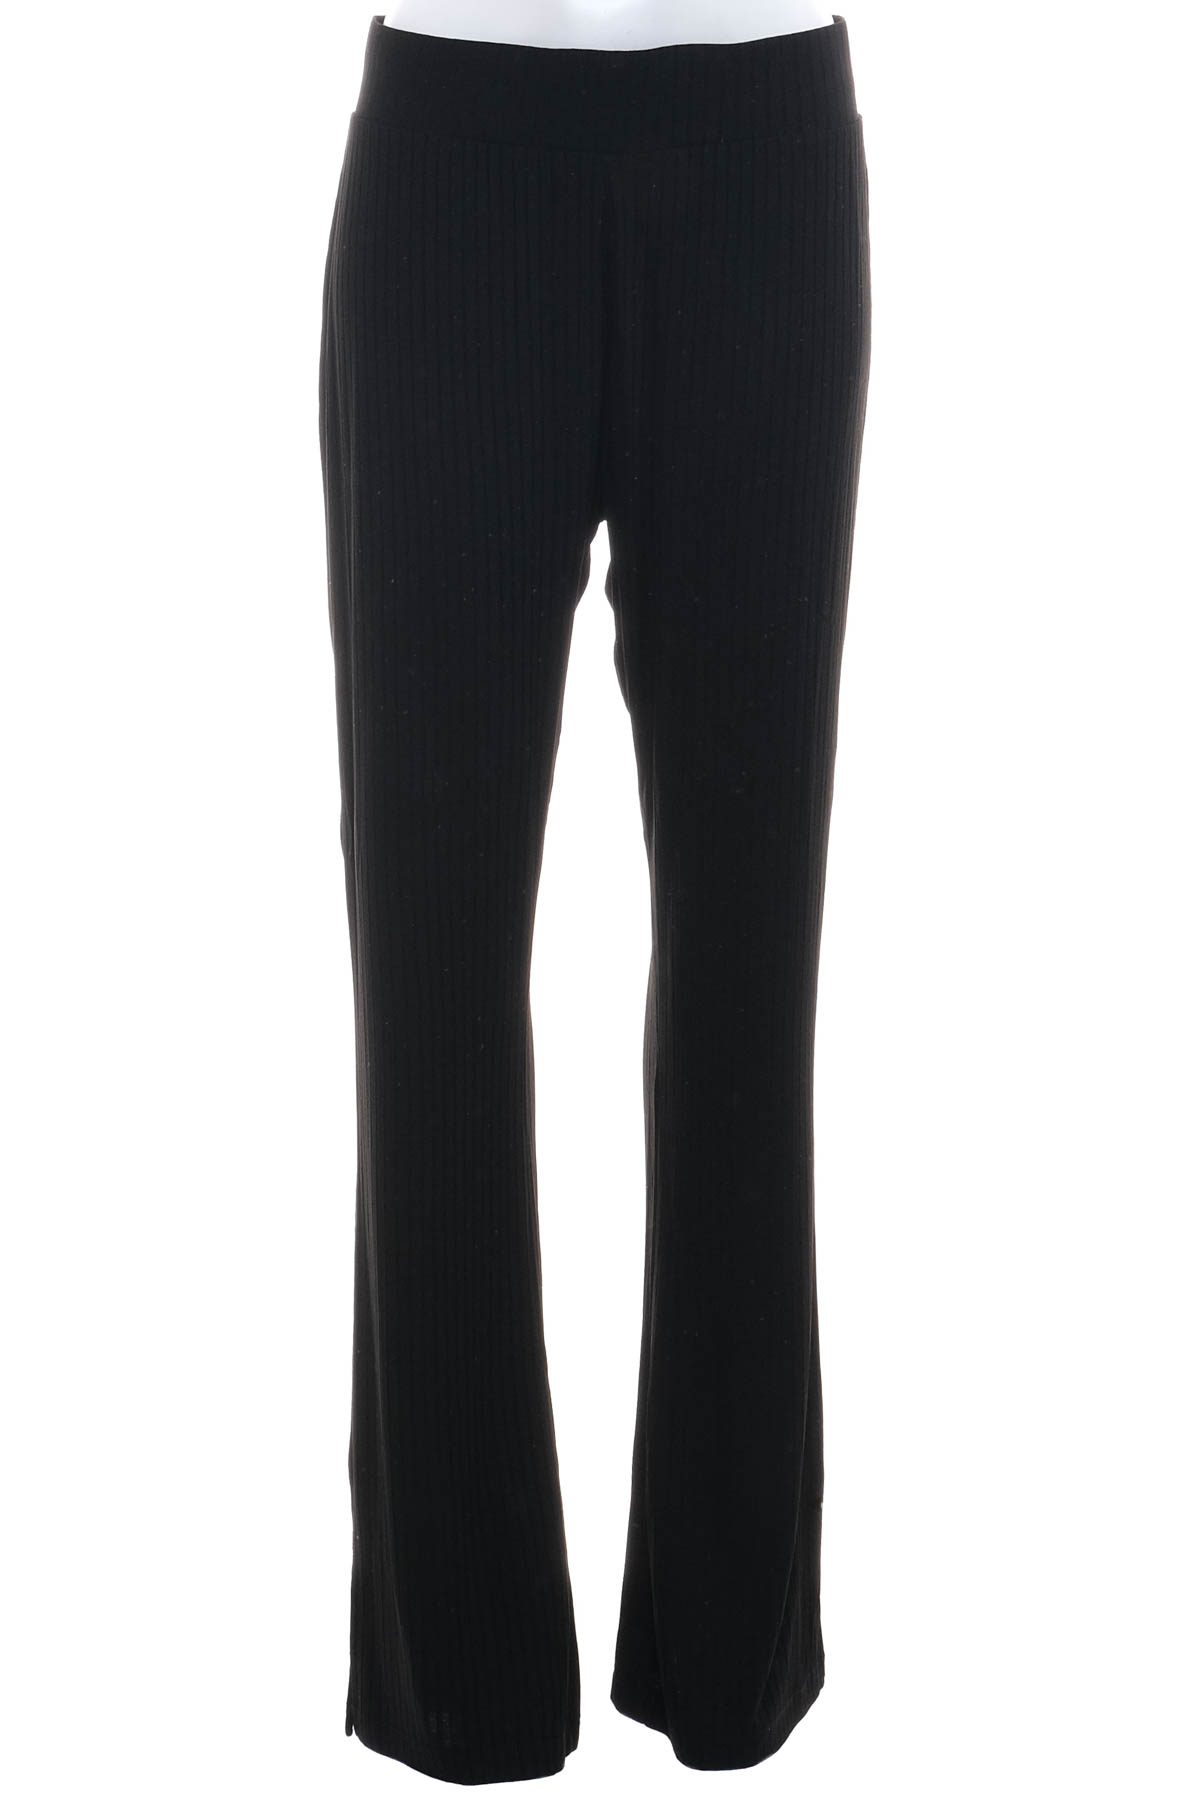 Women's trousers - TESSENTIALS - 0